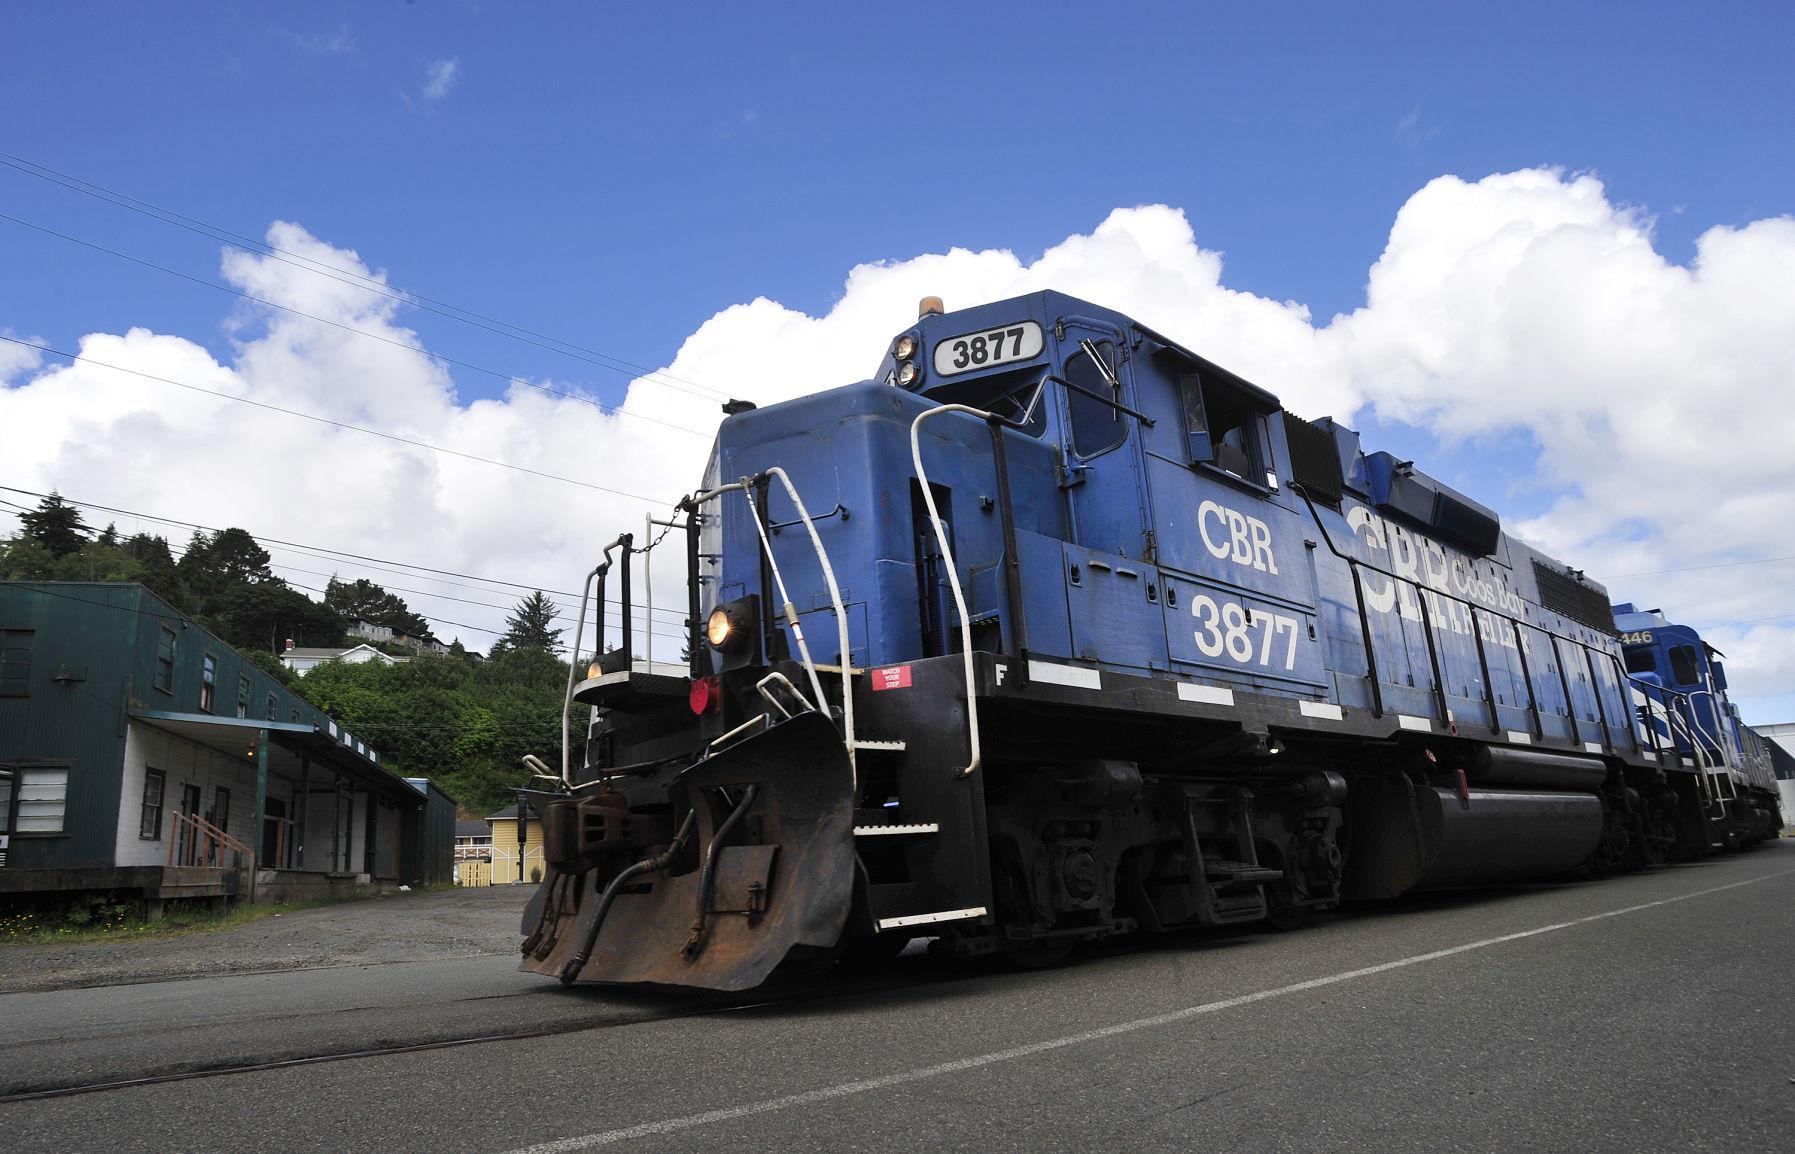 Coos Bay Rail Line to operate again | Local News | theworldlink.com